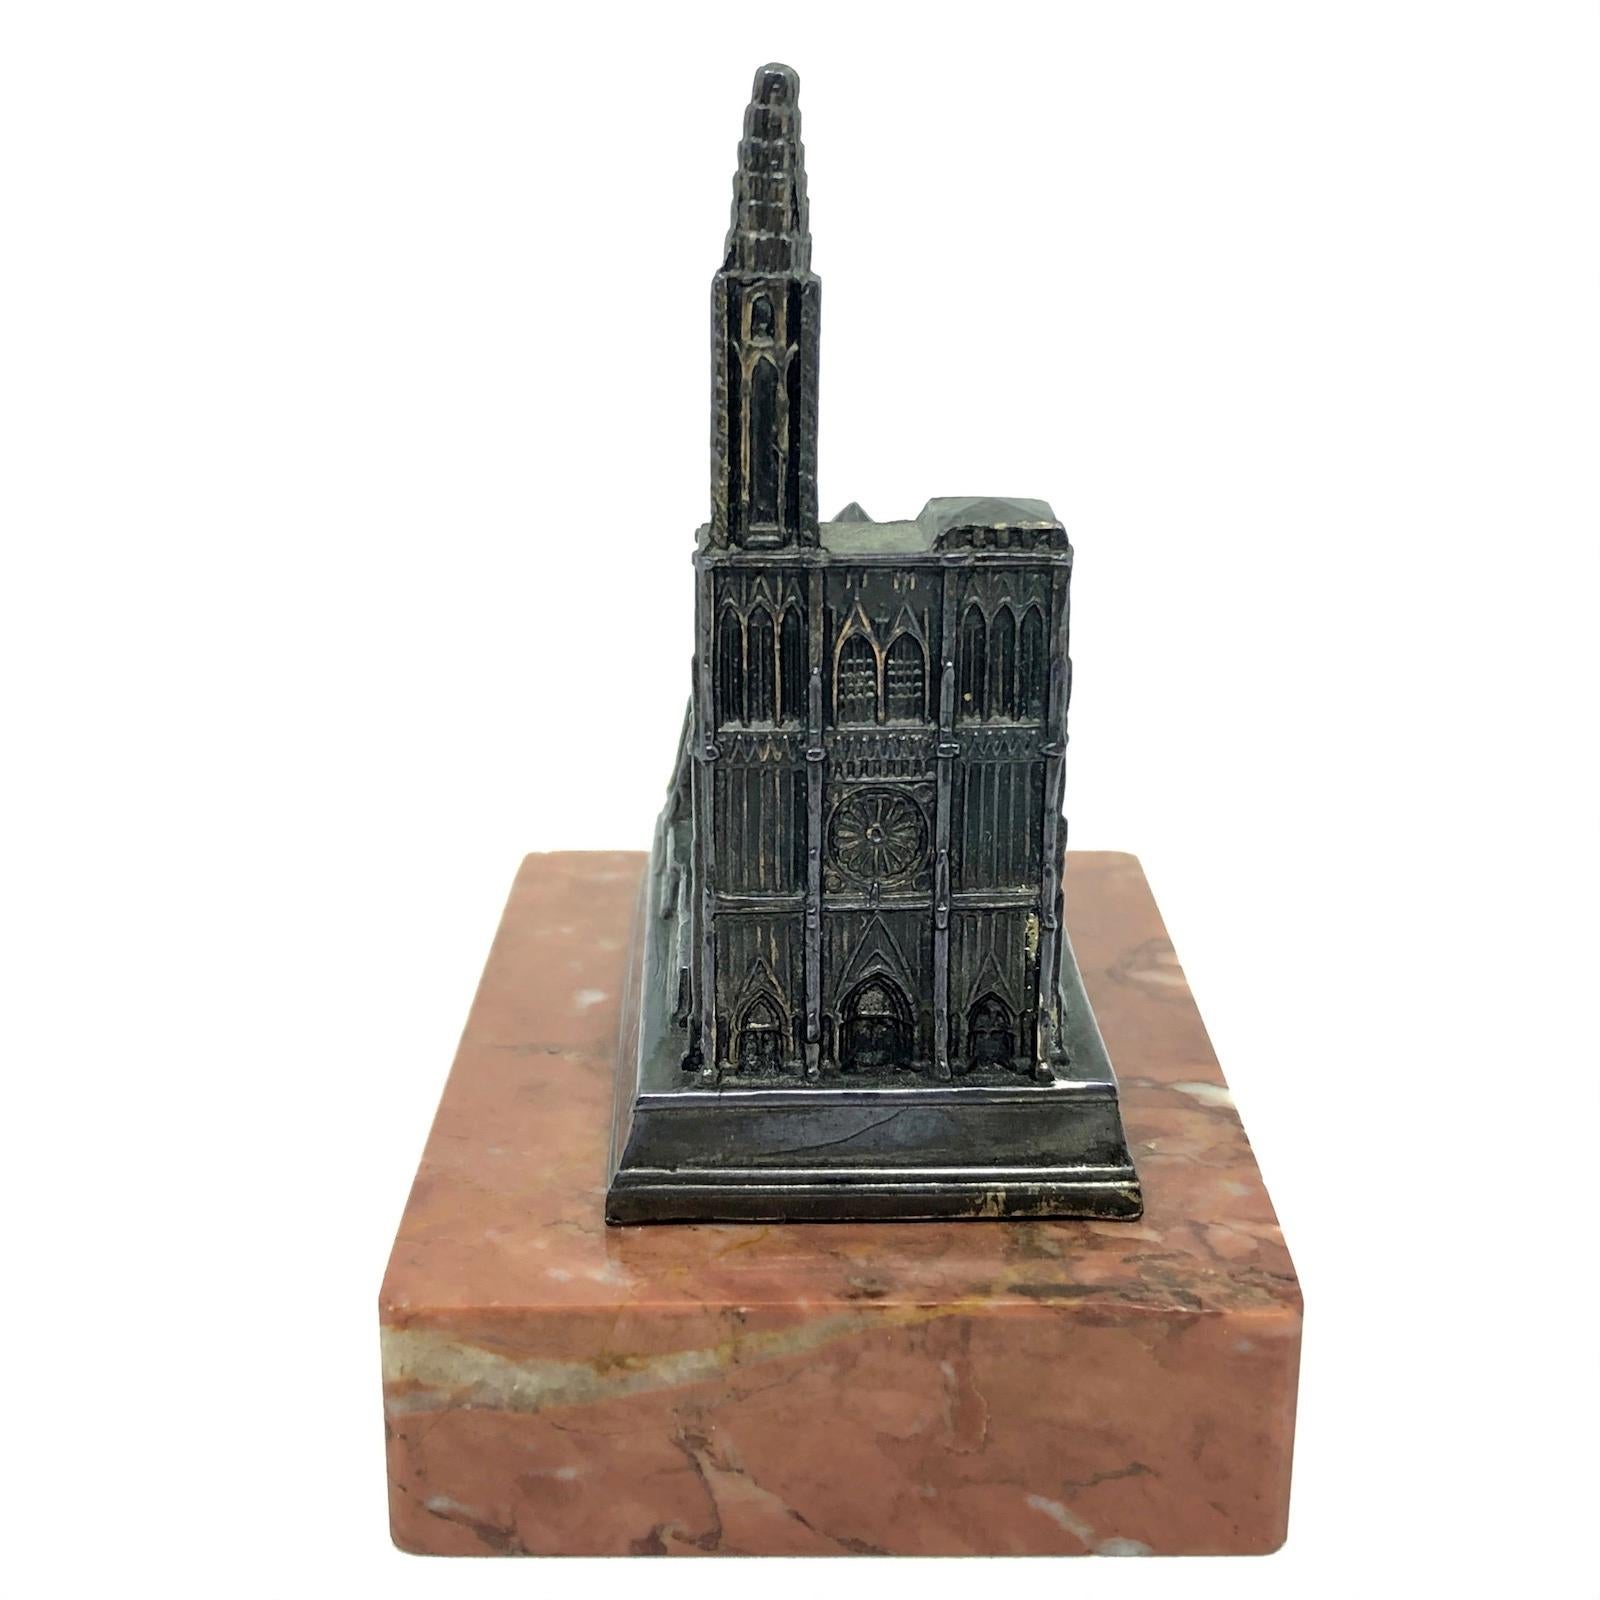 A Cathedral of Strasbourg 1950s Souvenir building architectural model. Some wear with a nice patina, but this is old-age. Made of metal on a marble base. This was bought as a souvenir in France. A beautiful nice desktop item or just a display item